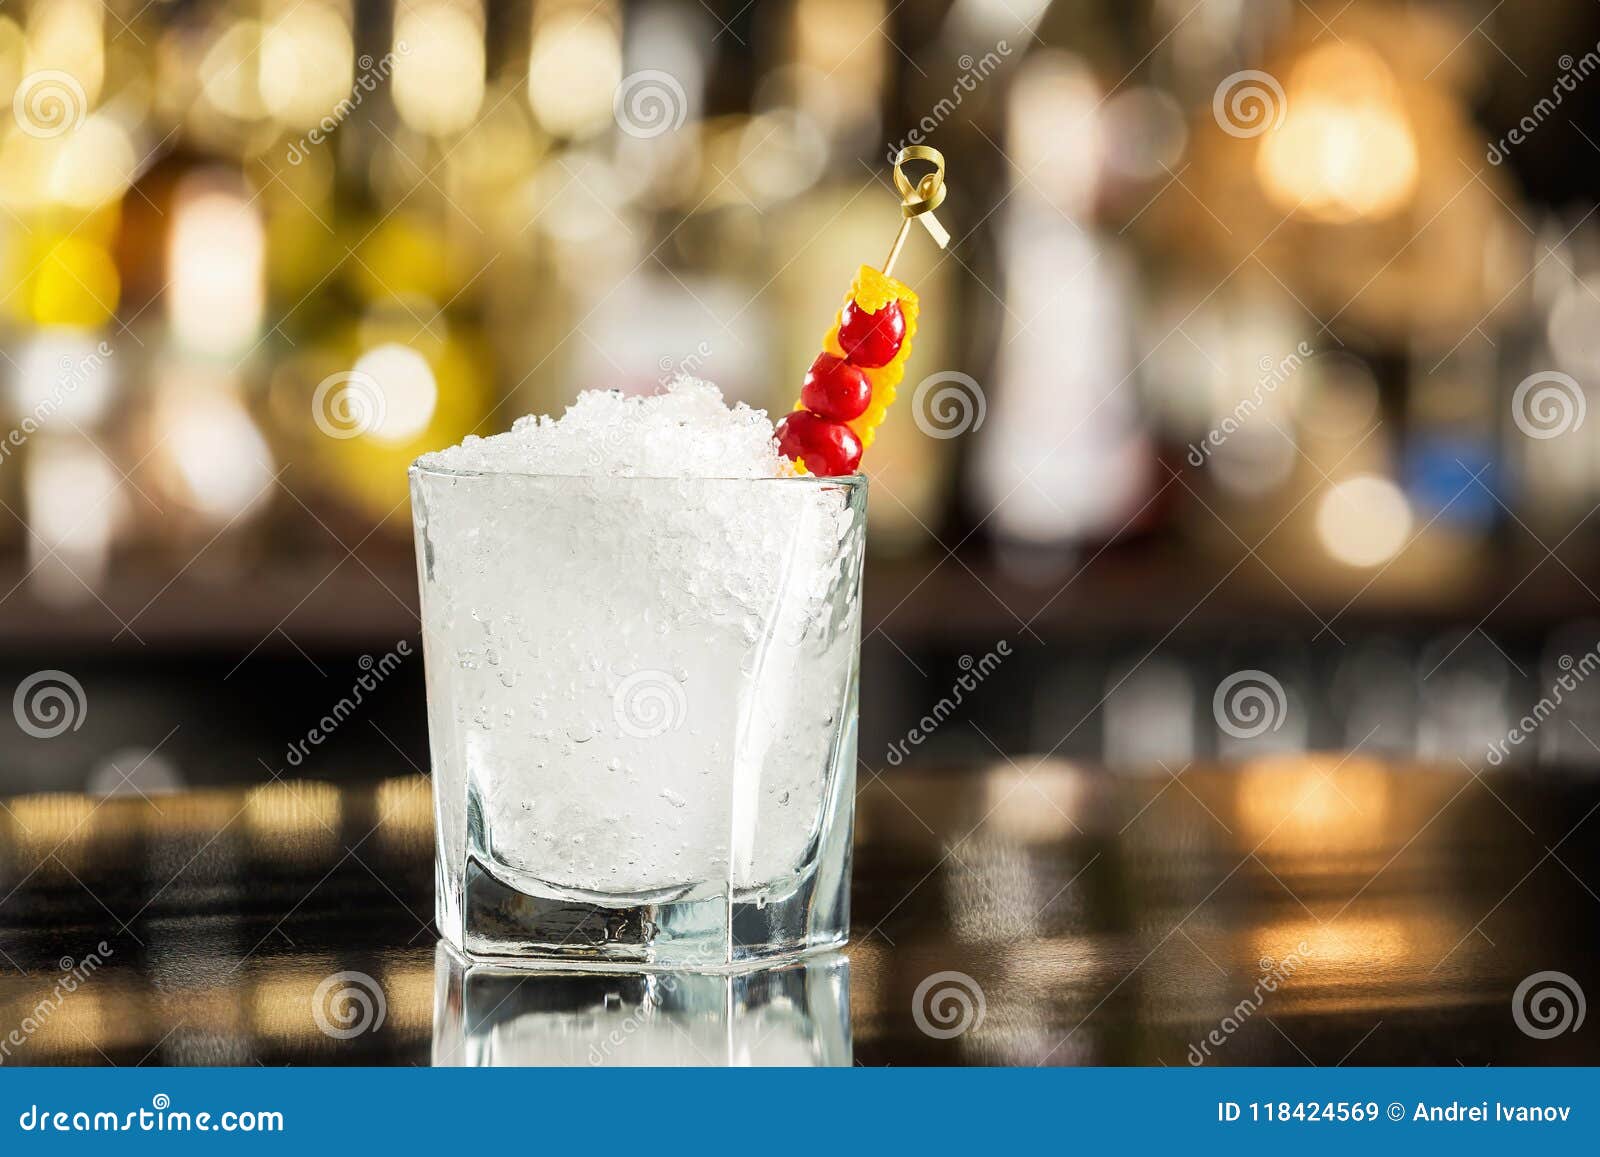 Download Closeup Image Of Cold Glass With Soda Water And Ice At Bar Stock Image Image Of Long Crystal 118424569 Yellowimages Mockups